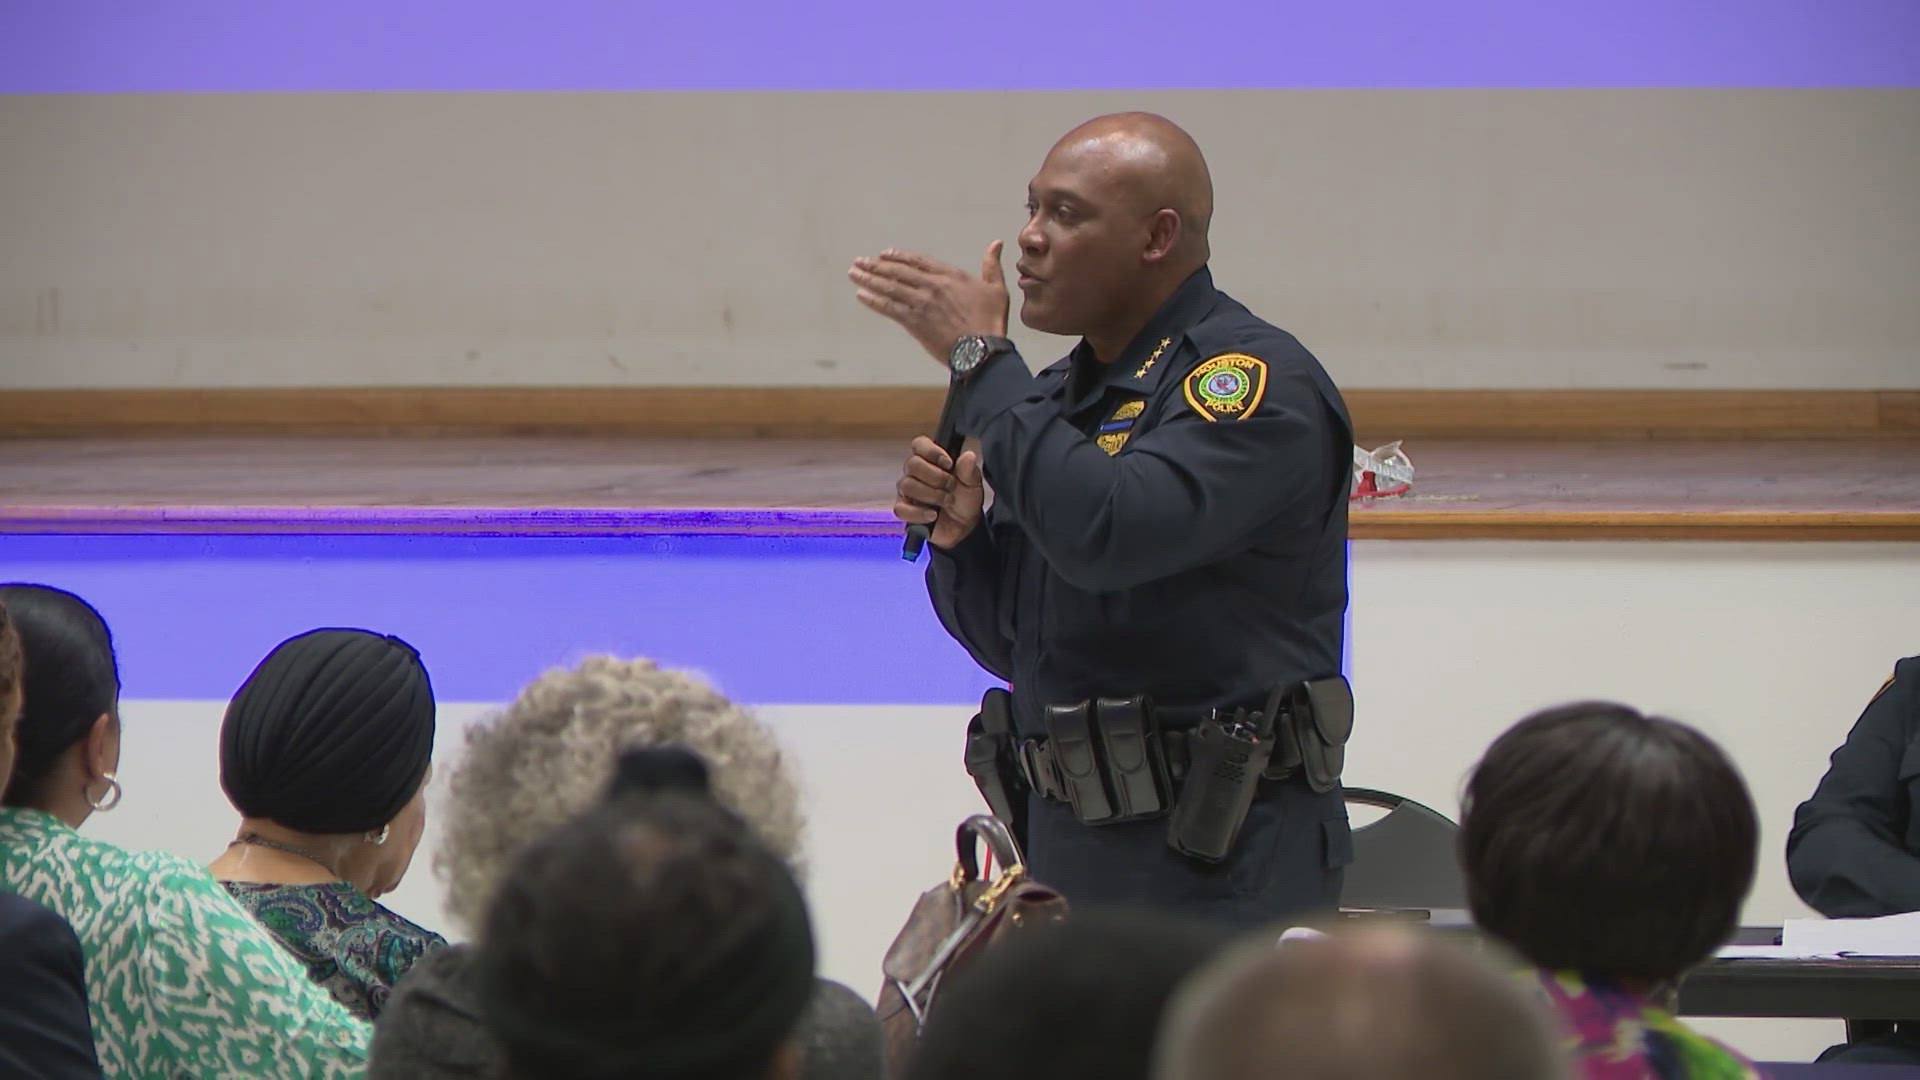 On Thursday night, every seat was taken during a town hall meeting Houston police officers held with frustrated residents.